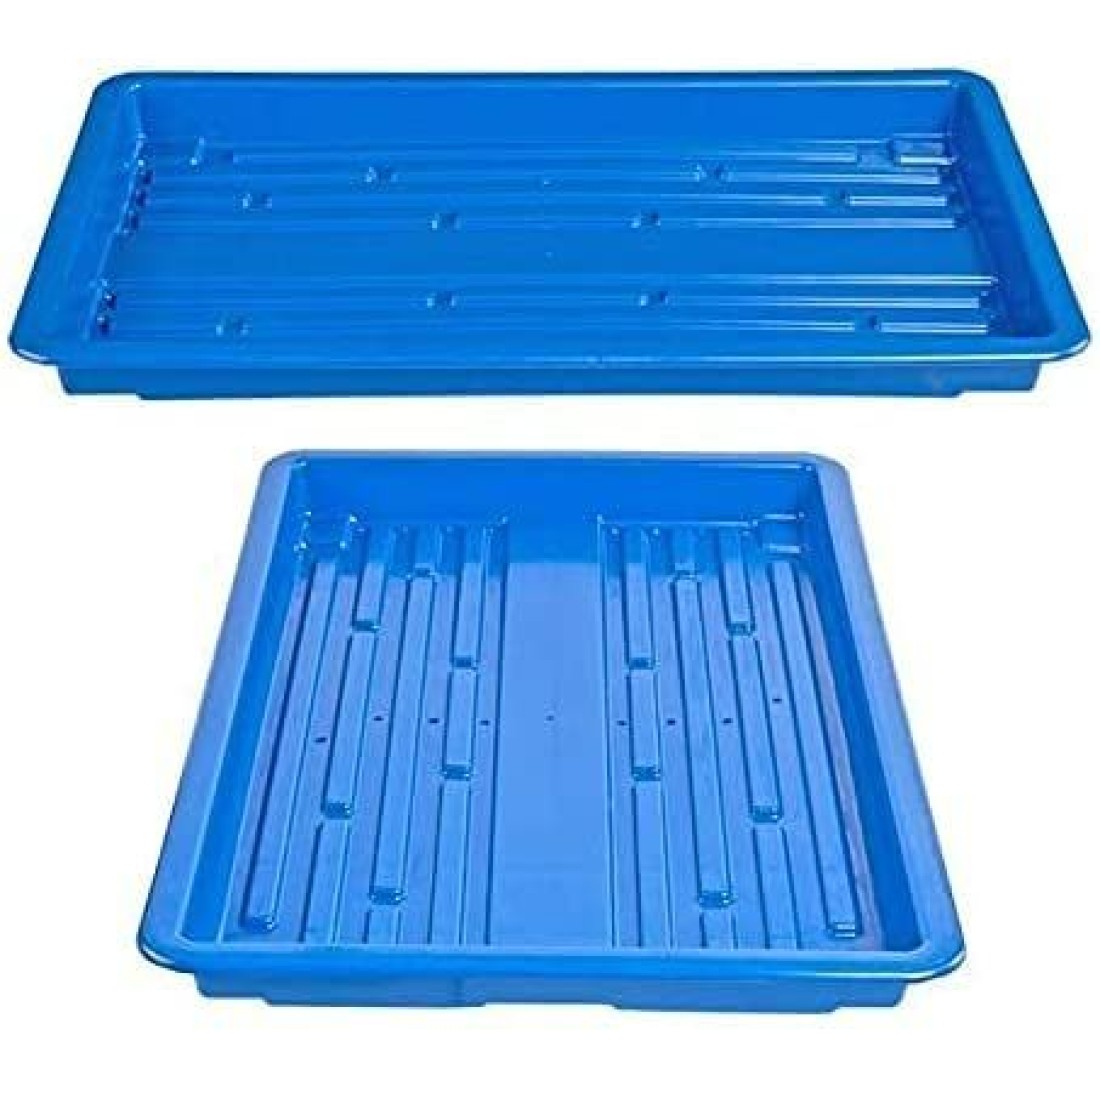 Hydroponics Germination Plastic Tray for Fodder Maize/microgreens/Seedling/Wheatgrass (Blue),pack of 10 trays 1